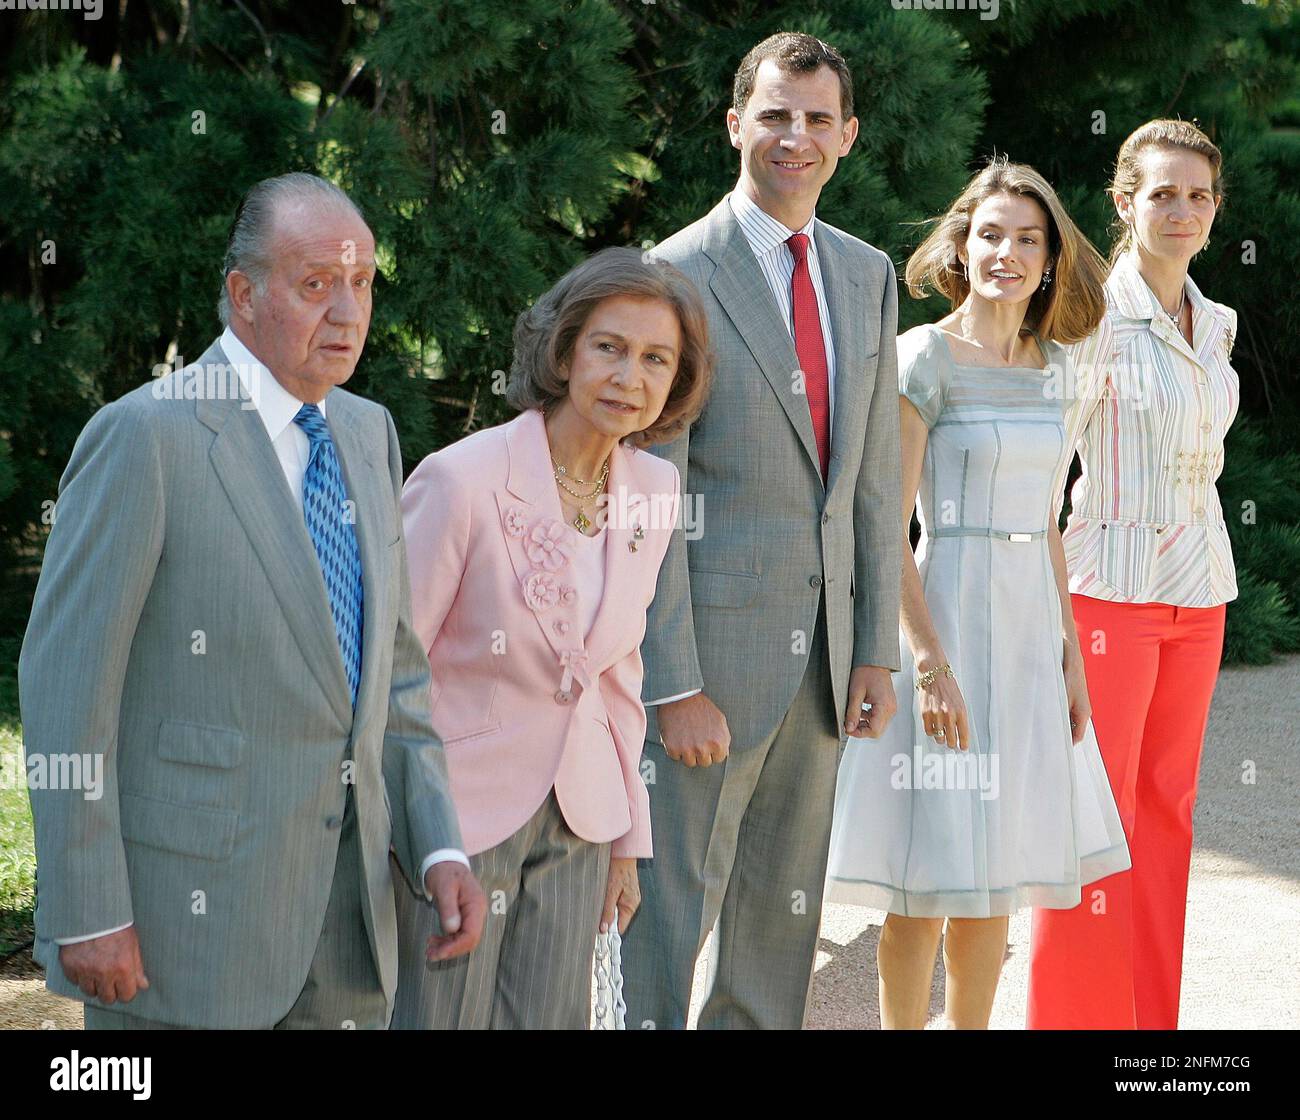 members-of-spains-royal-family-are-seen-in-the-garden-of-the-zarzuela-palace-on-the-outskirts-of-madrid-tuesday-july-1-2008-from-left-king-juan-carlos-queen-sofia-crown-prince-felipe-princess-letizia-and-princess-elena-ap-photopaul-white-2NFM7CG.jpg